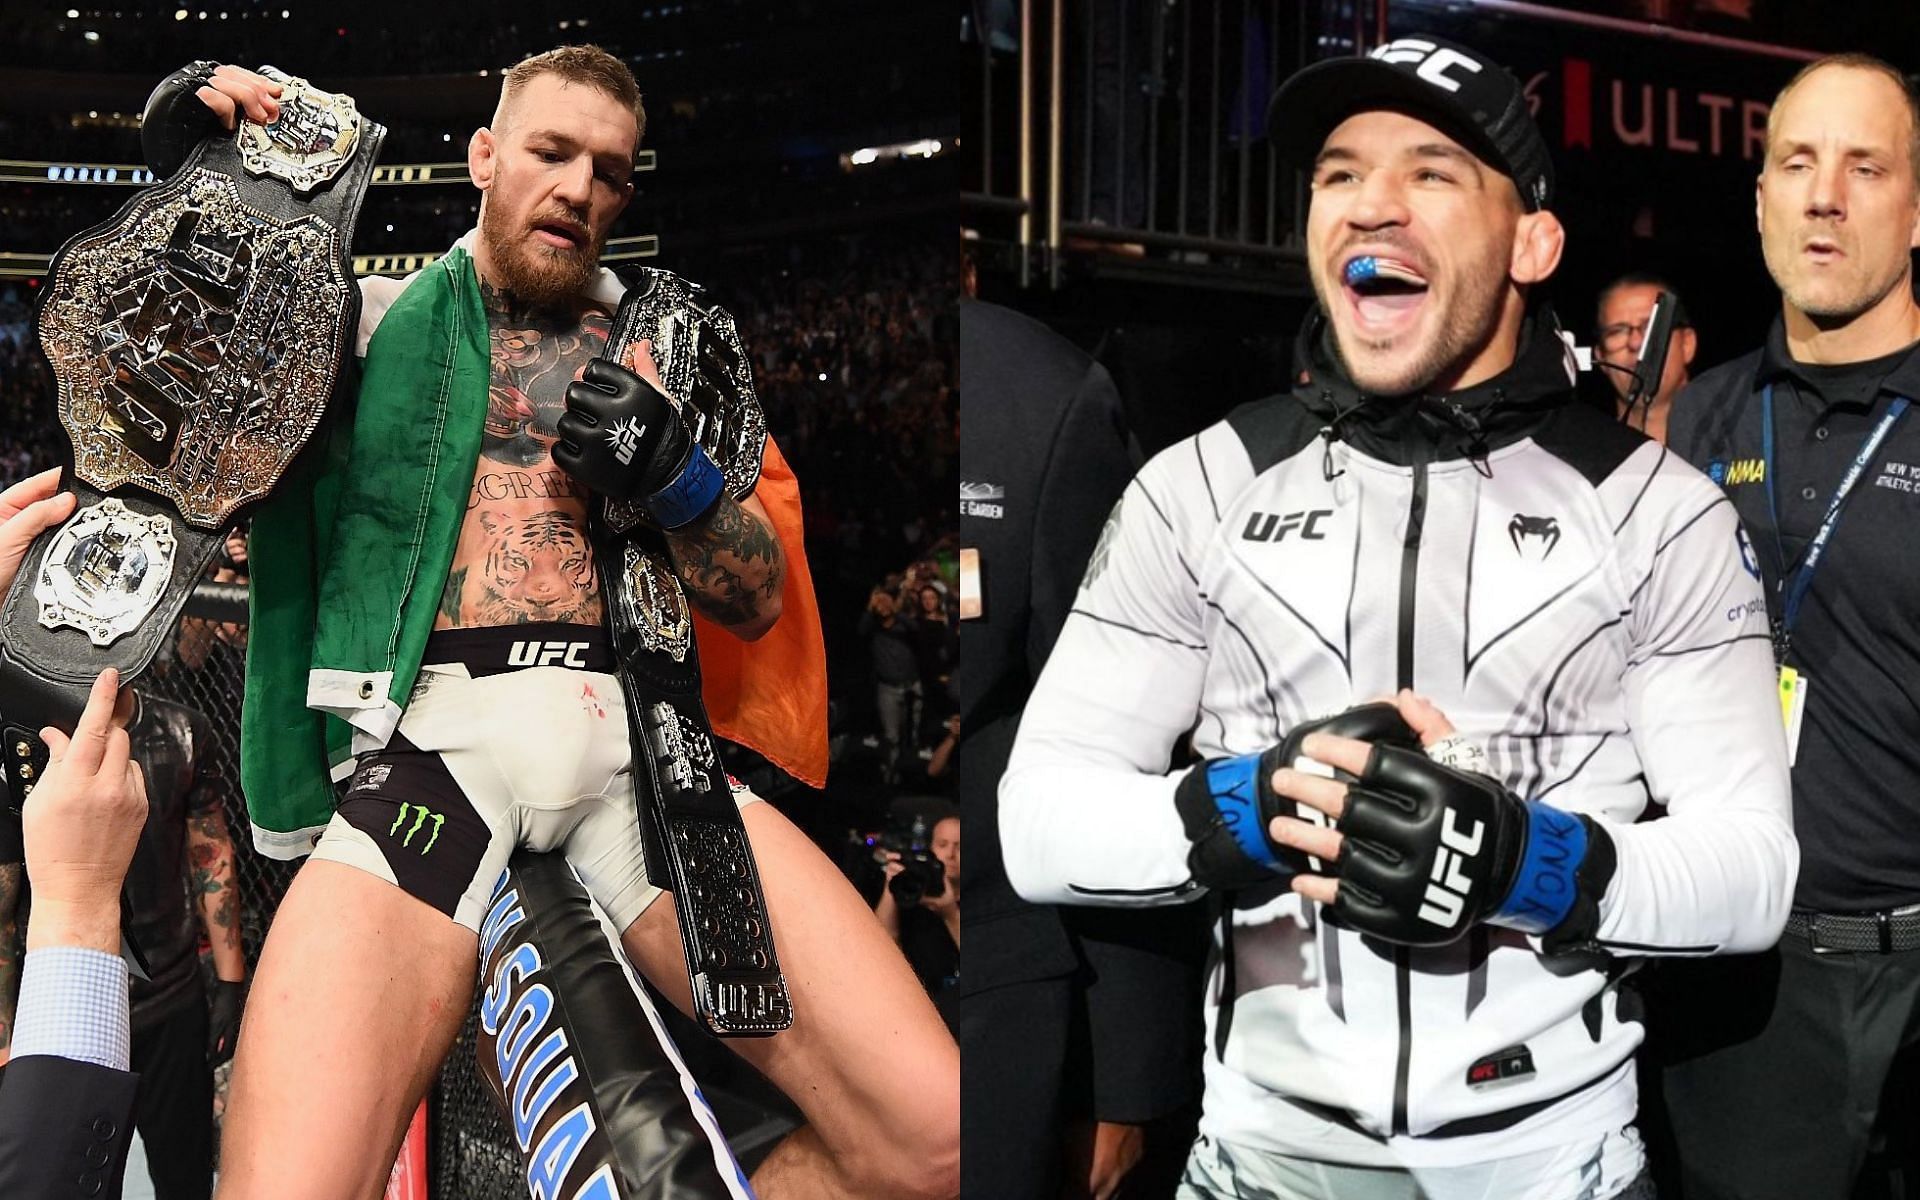 Conor McGregor (left) should fight at lightweight more often amid return at 185 pounds against Michael Chandler (right), says UFC commentator [Images Courtesy: @suga_szn_ on X and @mikechandlermma on Instagram]